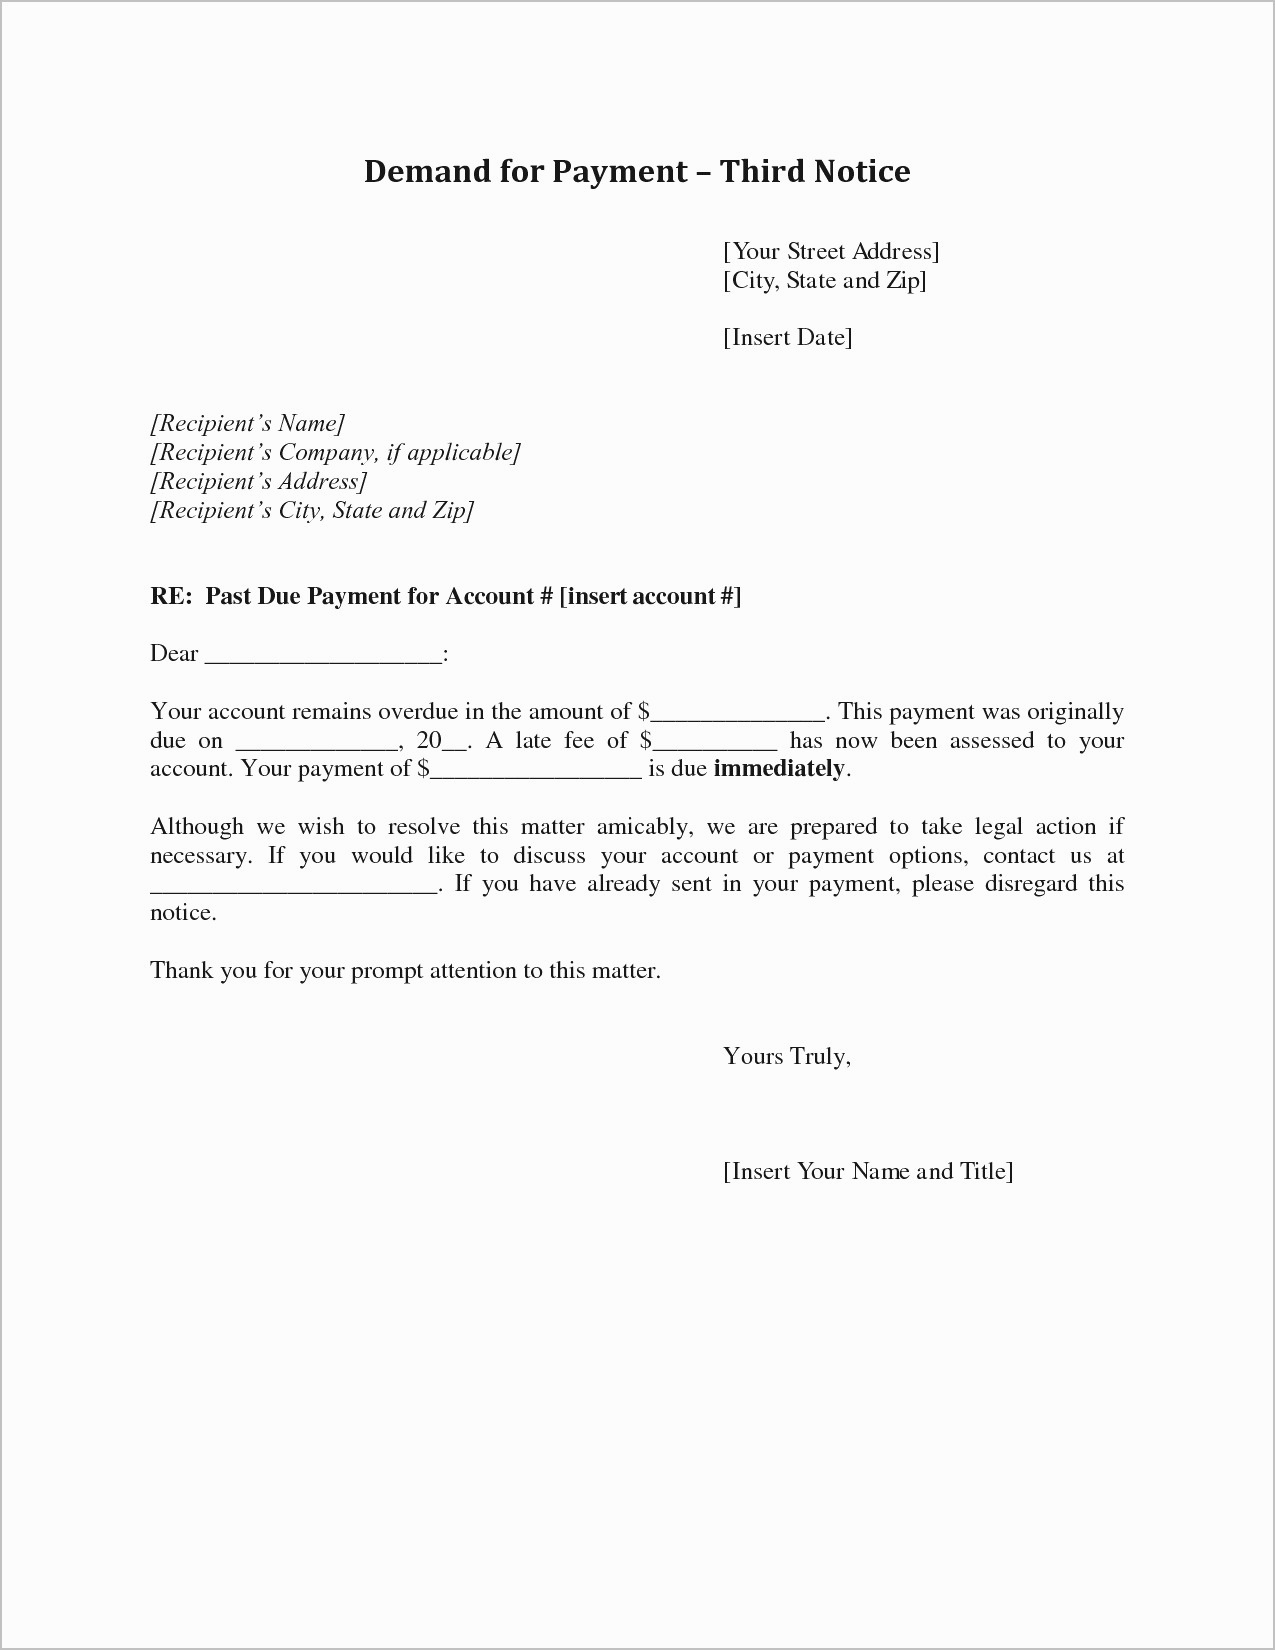 Sample Demand Letter for Payment Awesome Final Demand for Payment Letter Template Examples